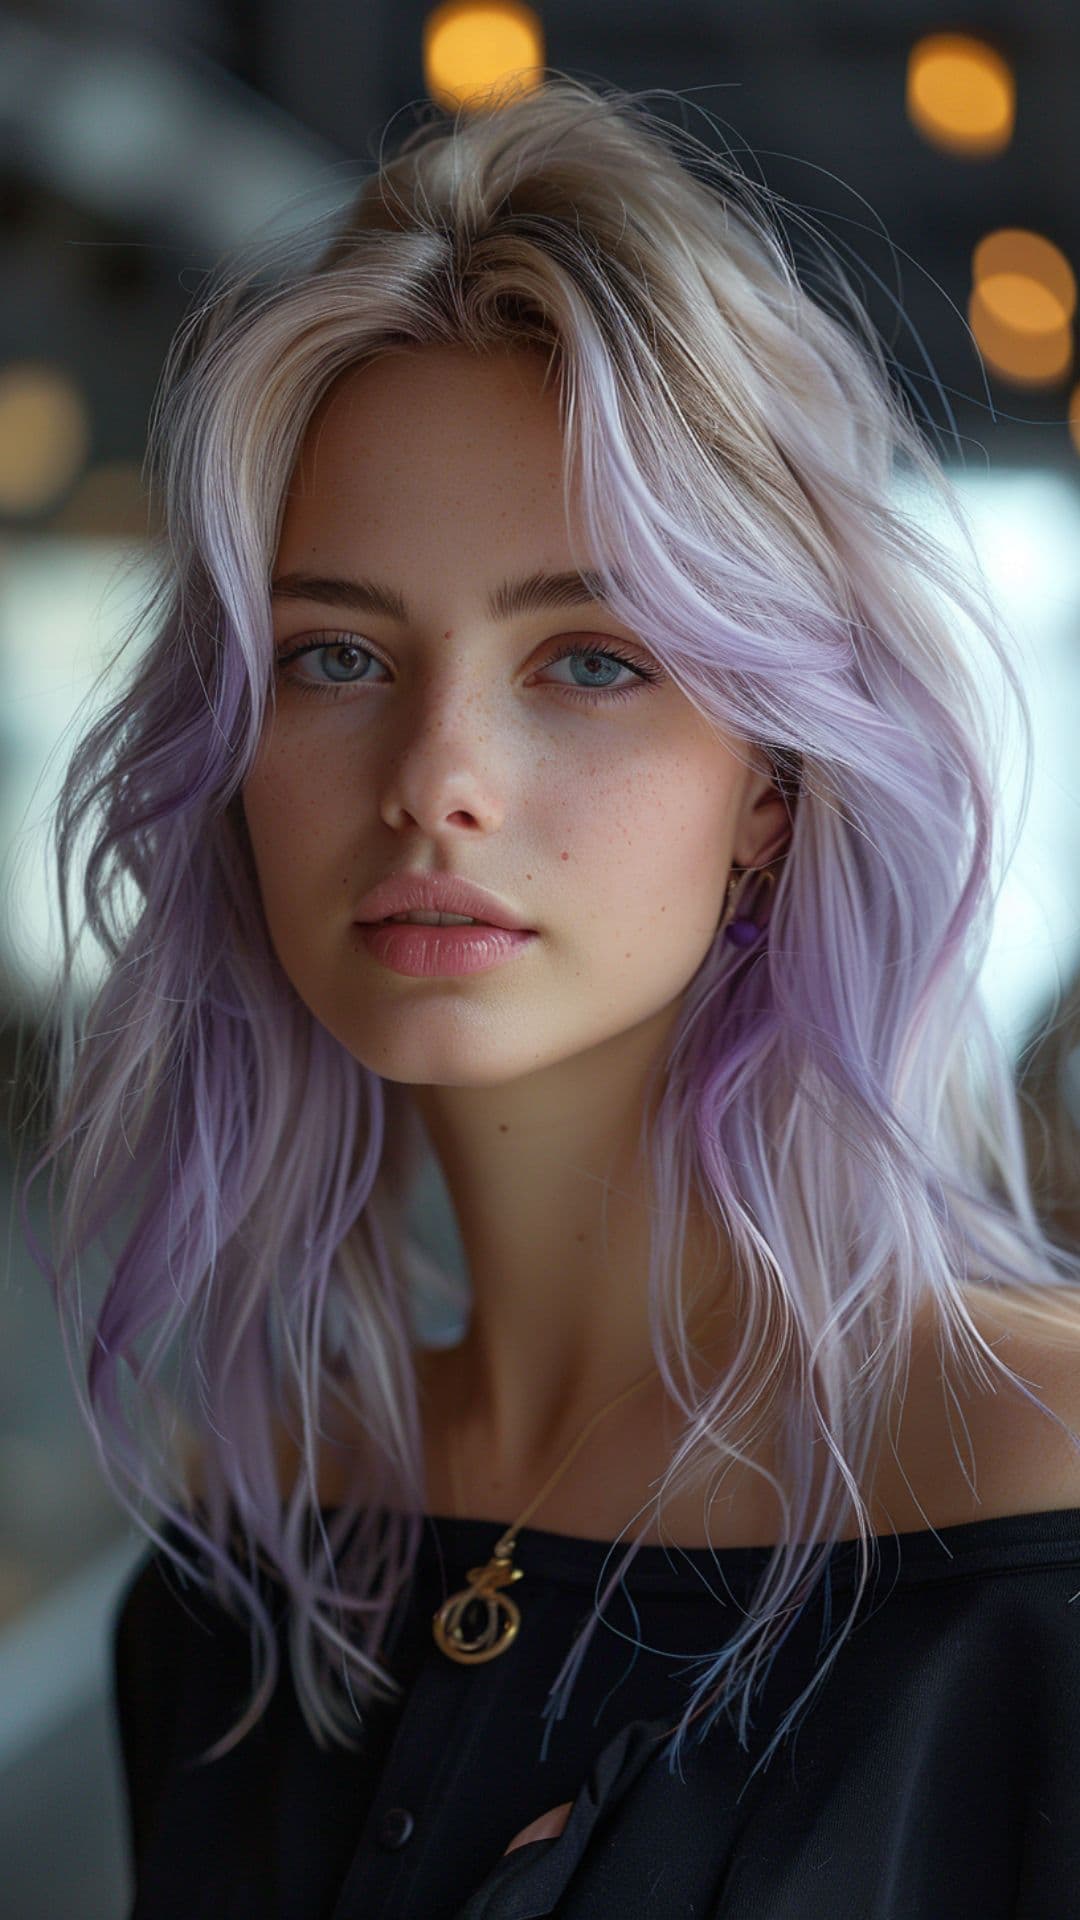 A woman modelling a silver and lavender hair.